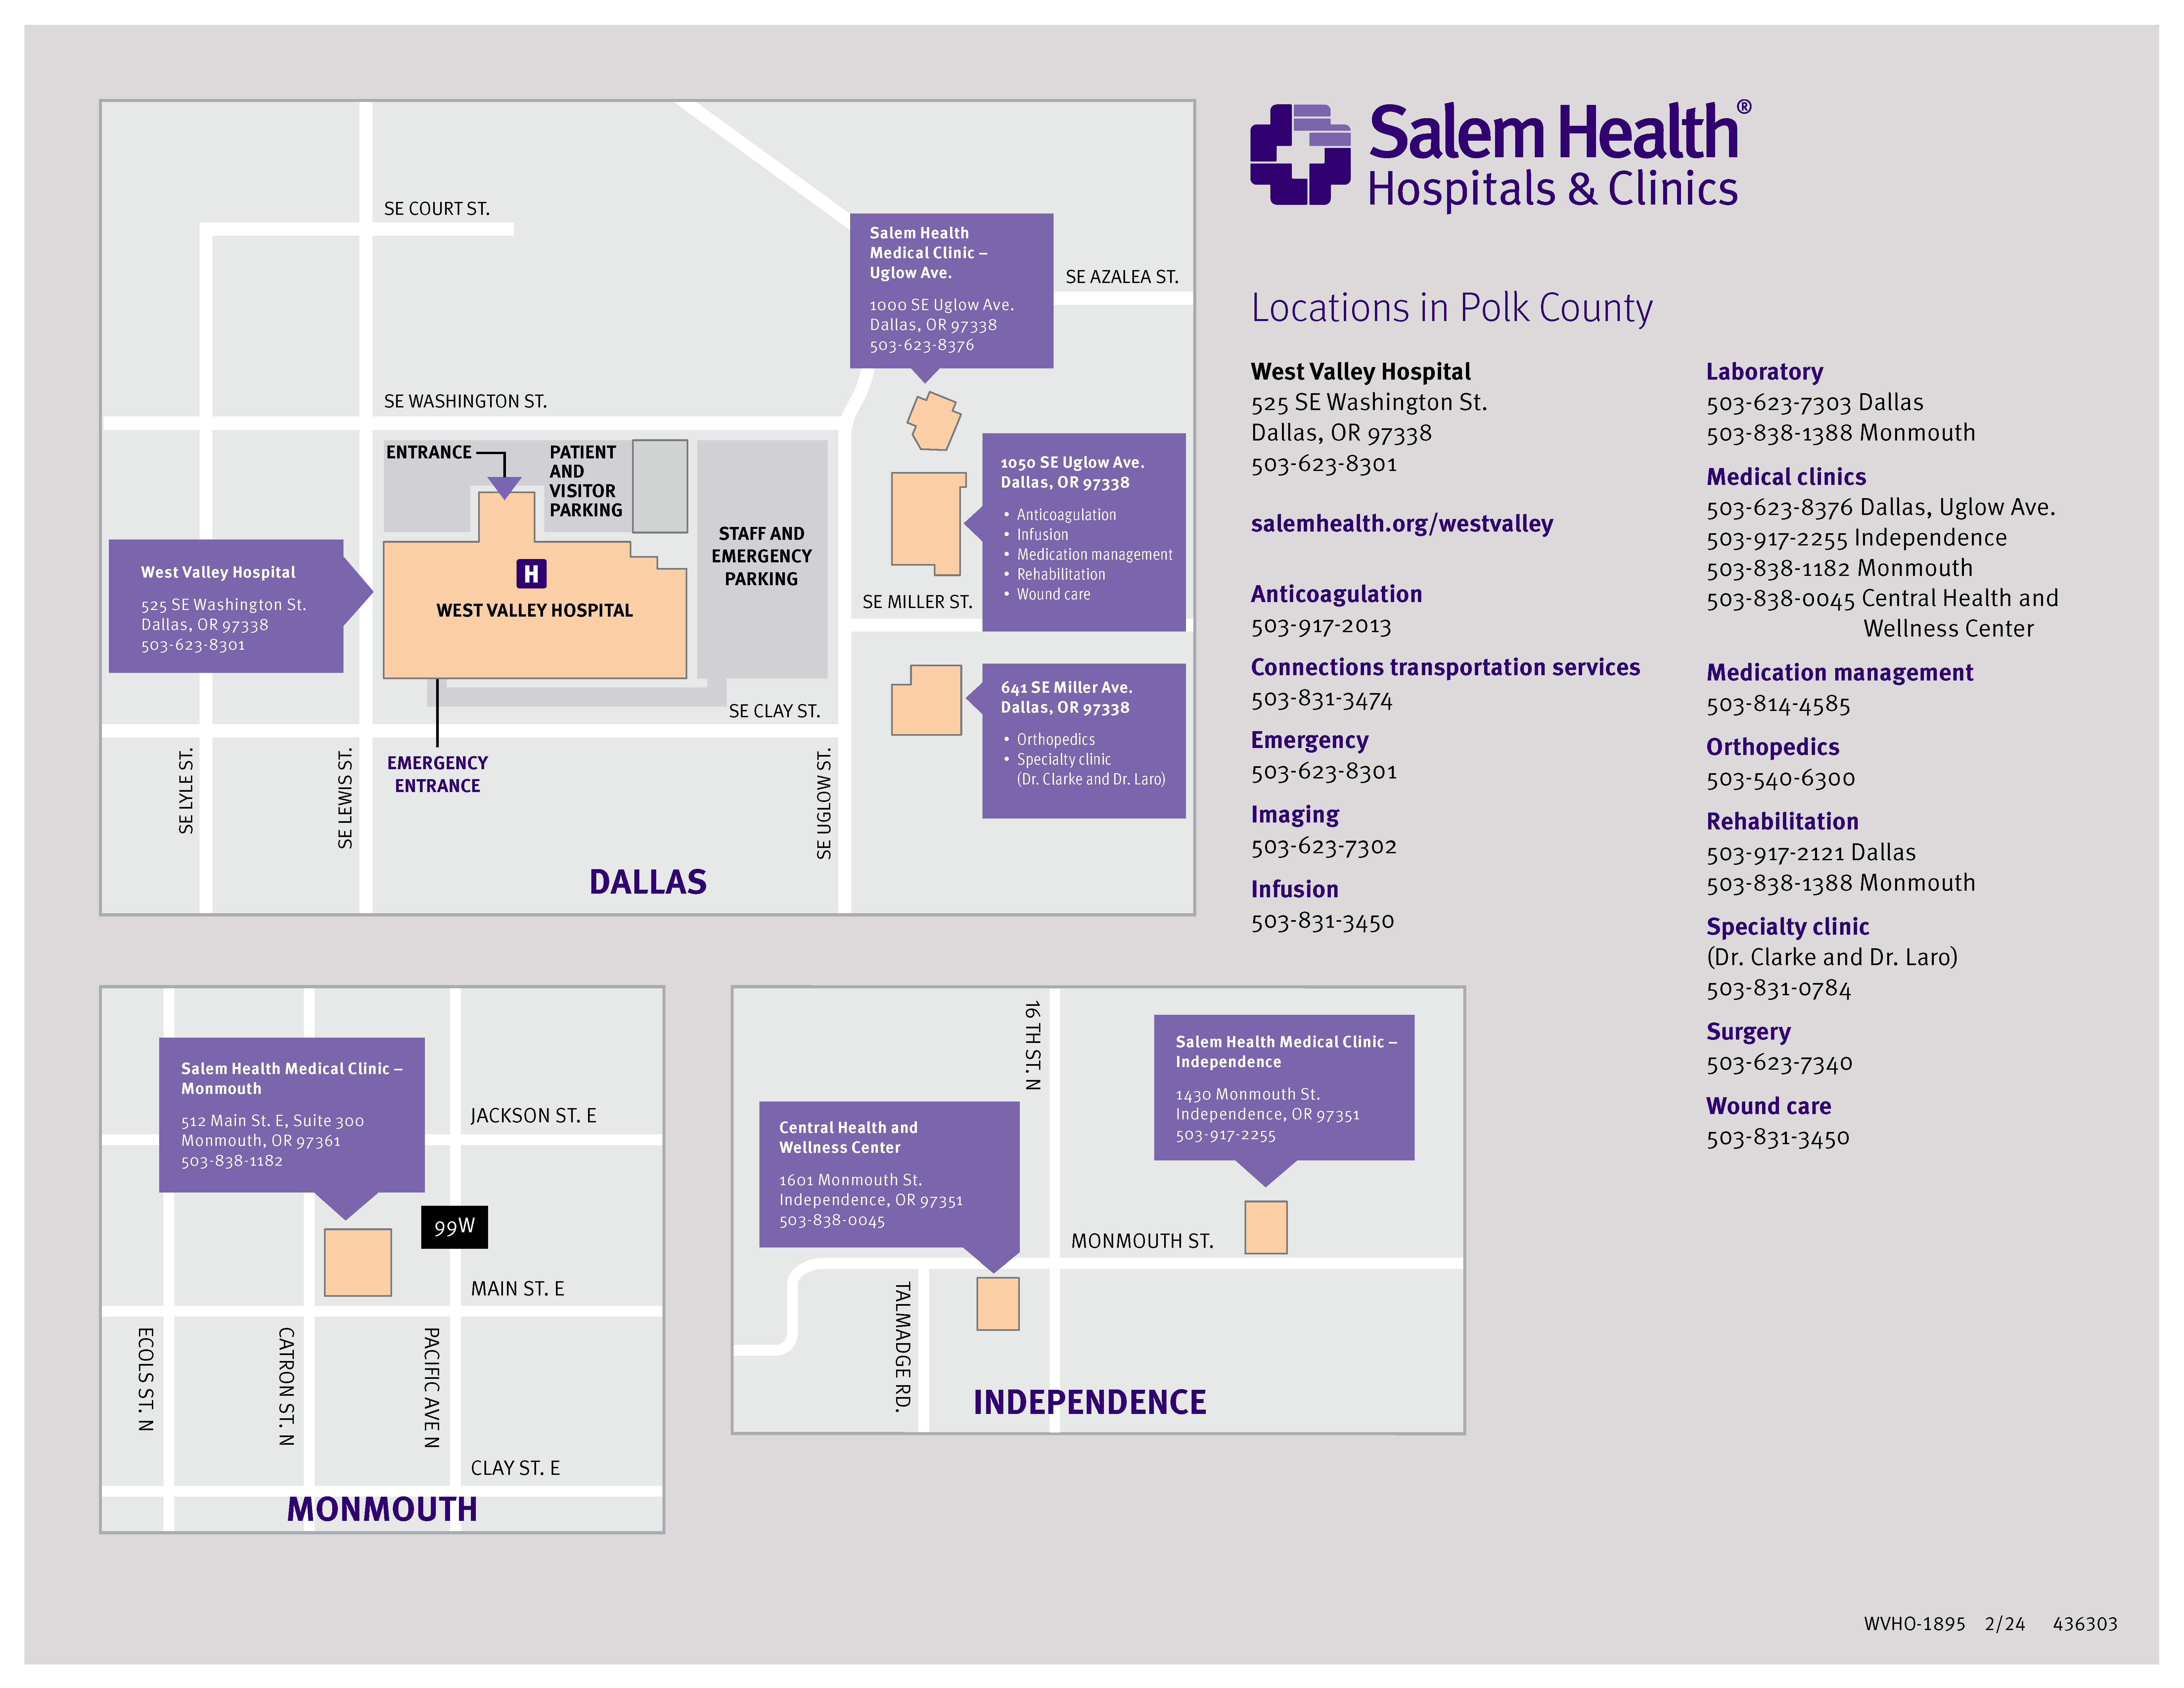 A map showing the locations of Salem Health facilities in Polk County